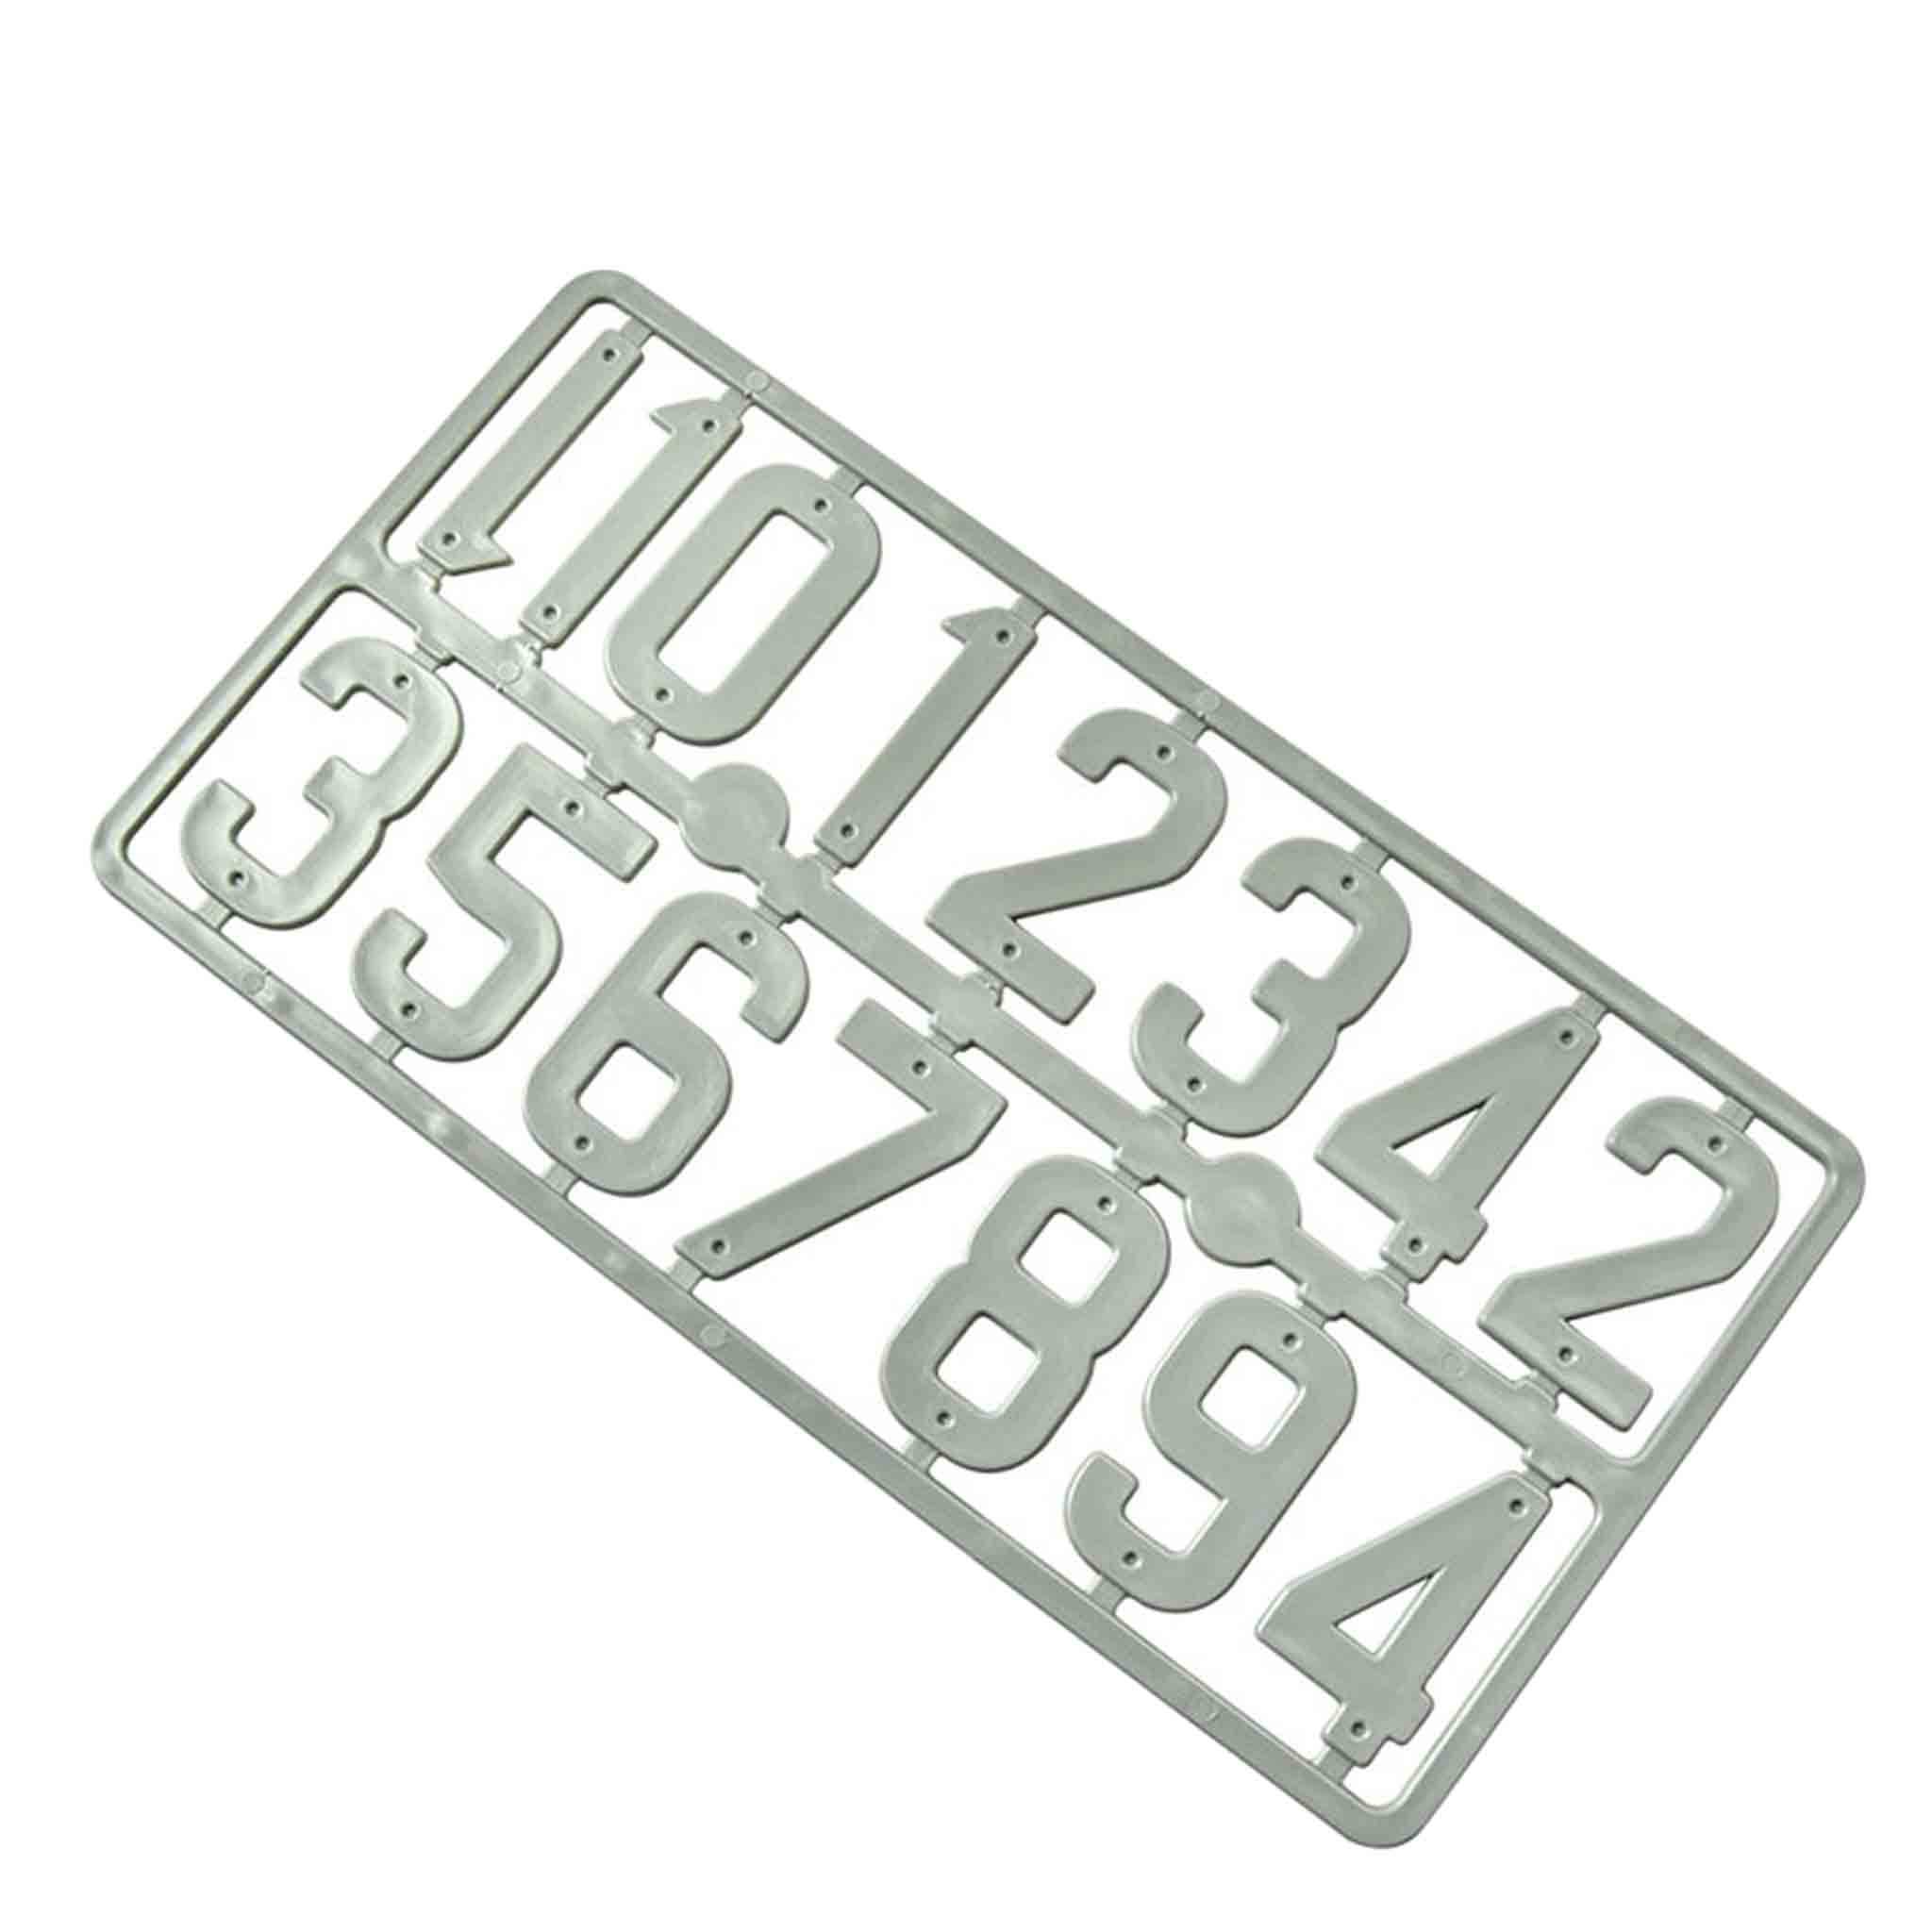 Bee Hive Grey Numbers for Labelling your Bee Hives - Accessories collection by Buzzbee Beekeeping Supplies